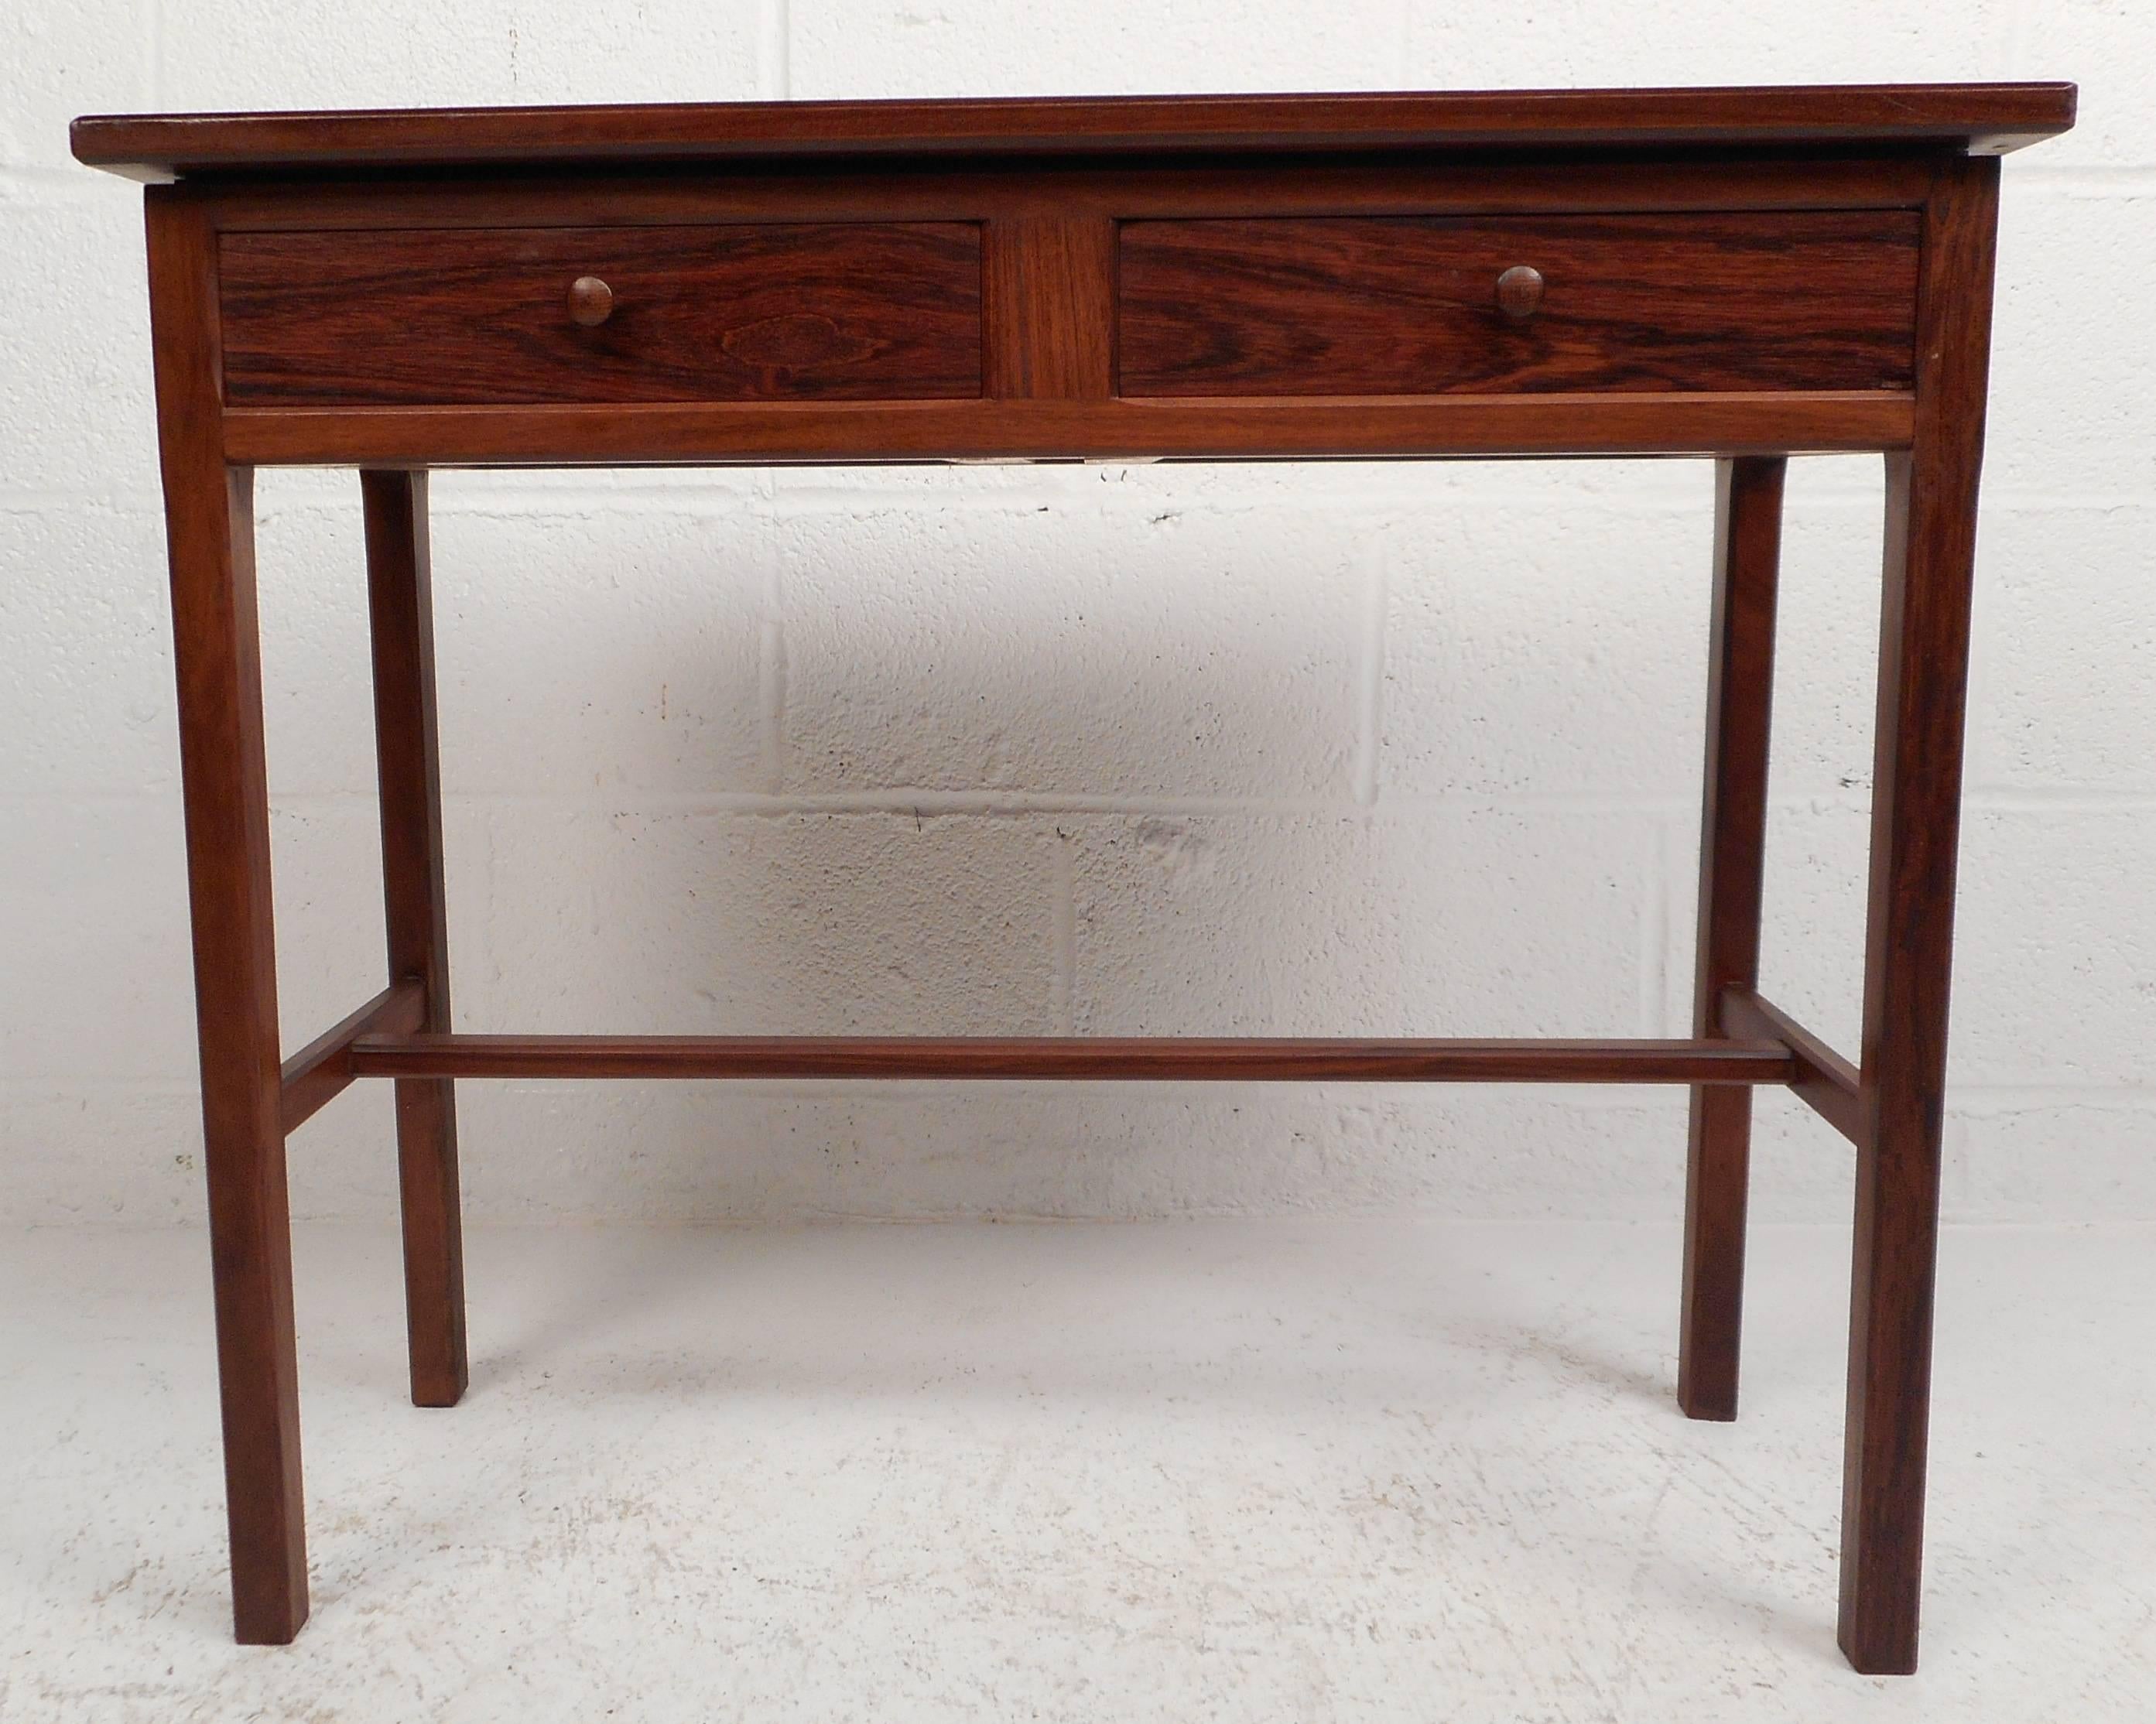 Lovely vintage modern small console table features two drawers with unique round pulls. Beautiful vintage rosewood finish with three stretchers between four sturdy legs ensure style and sturdiness. Sleek finished rosewood back makes it the perfect